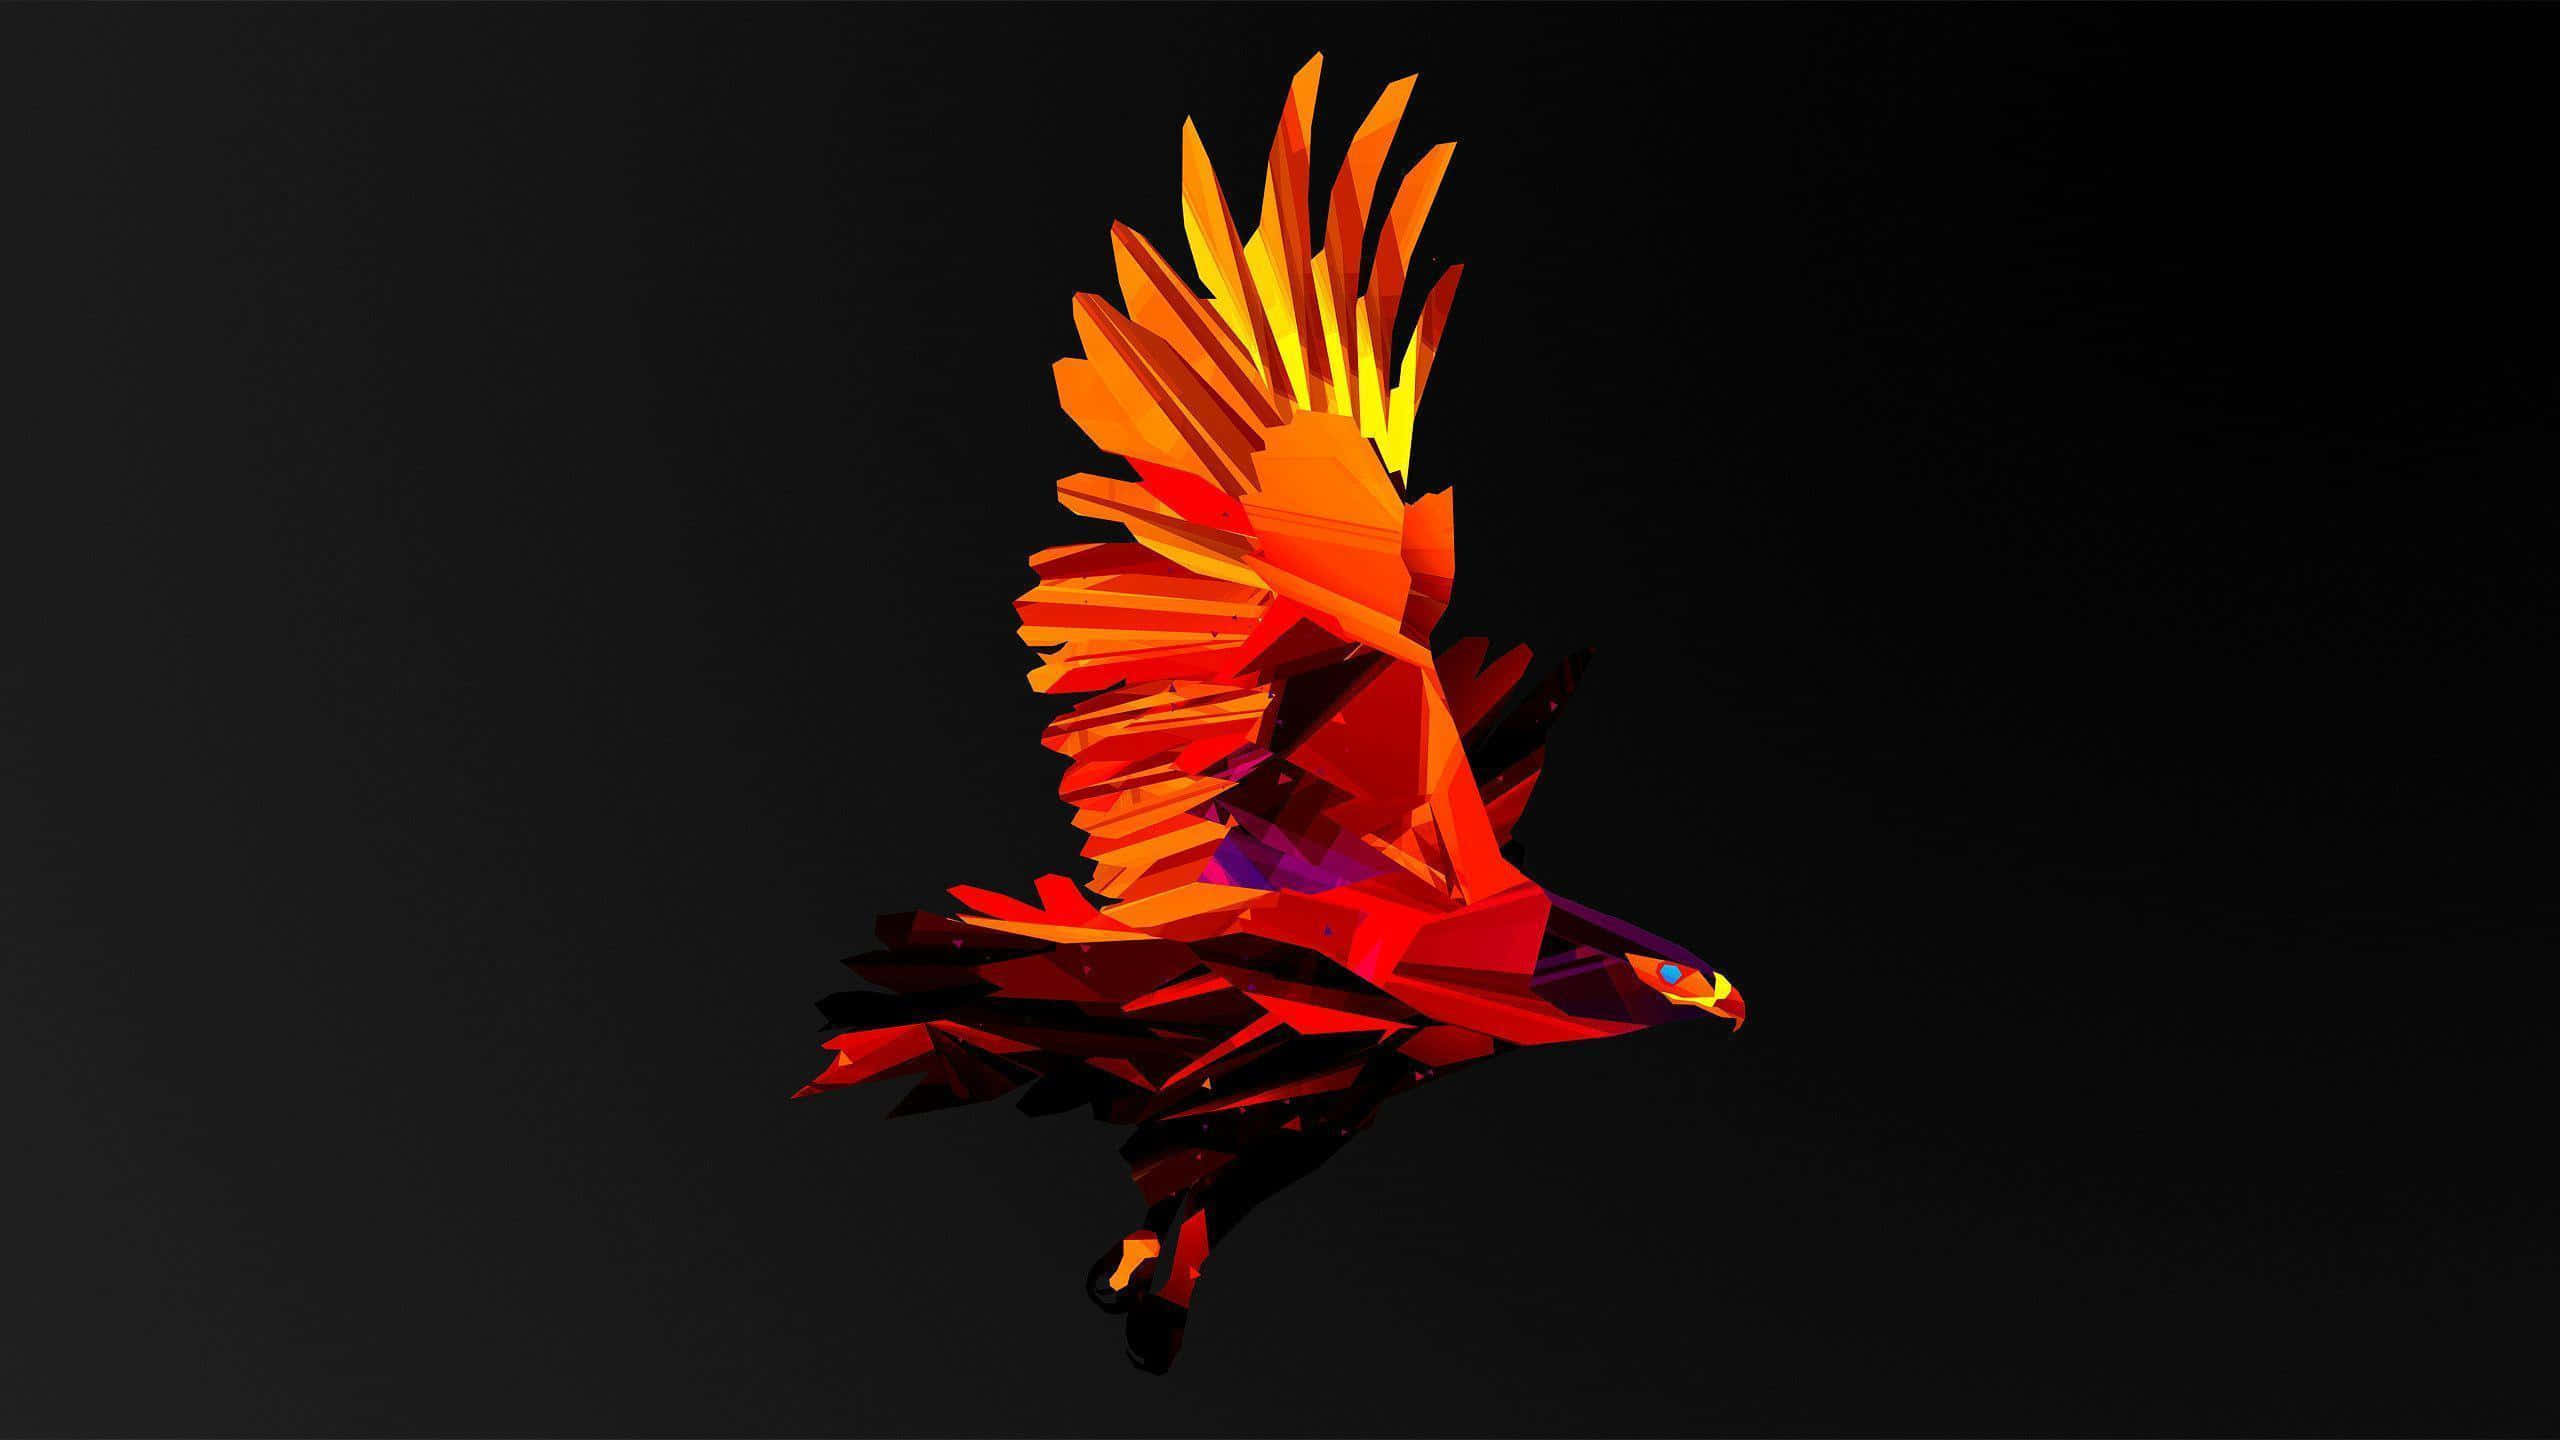 A Colorful Eagle Flying In The Dark